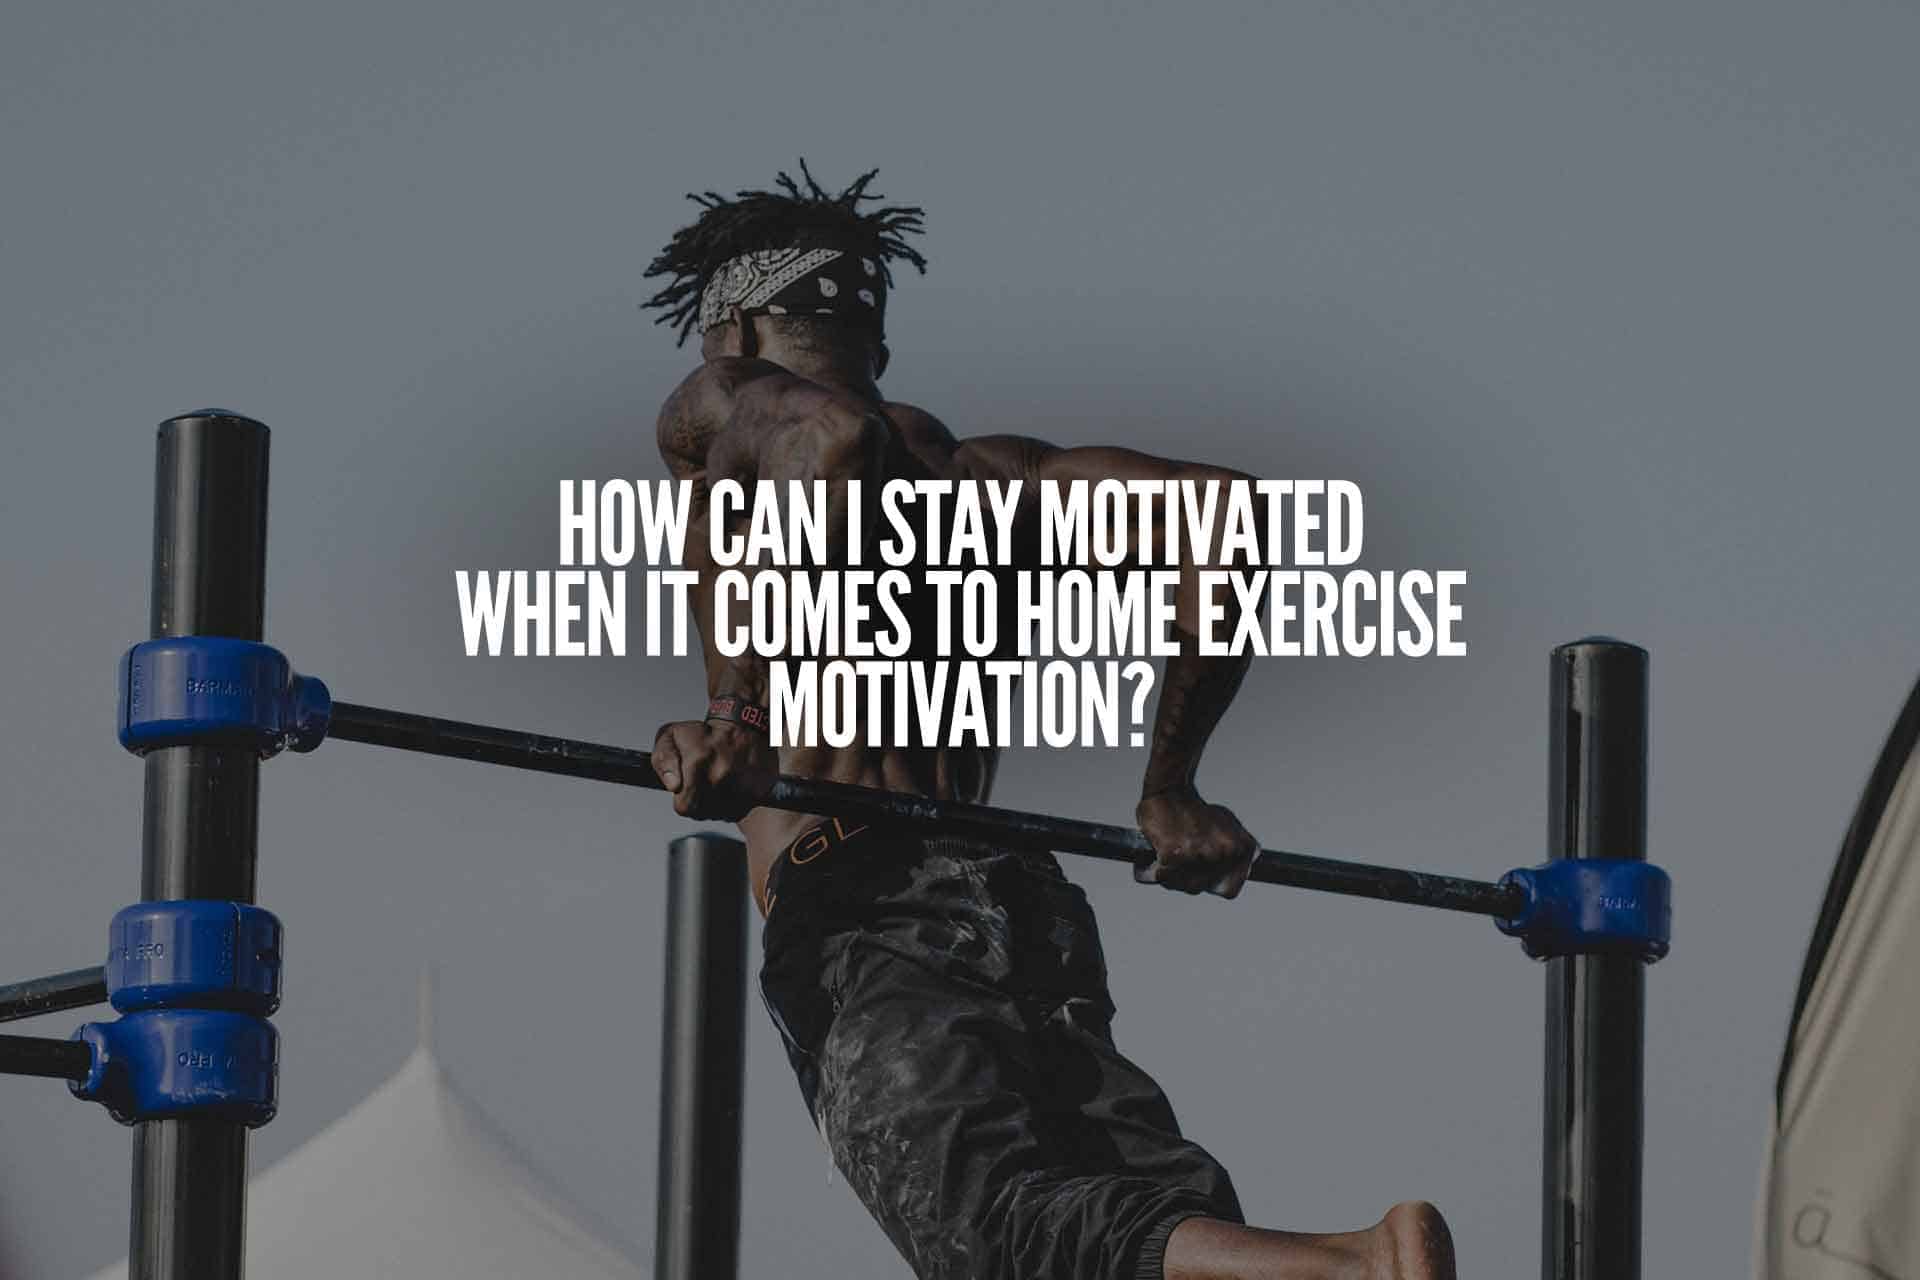 How can I stay motivated when it comes to home exercise motivation?